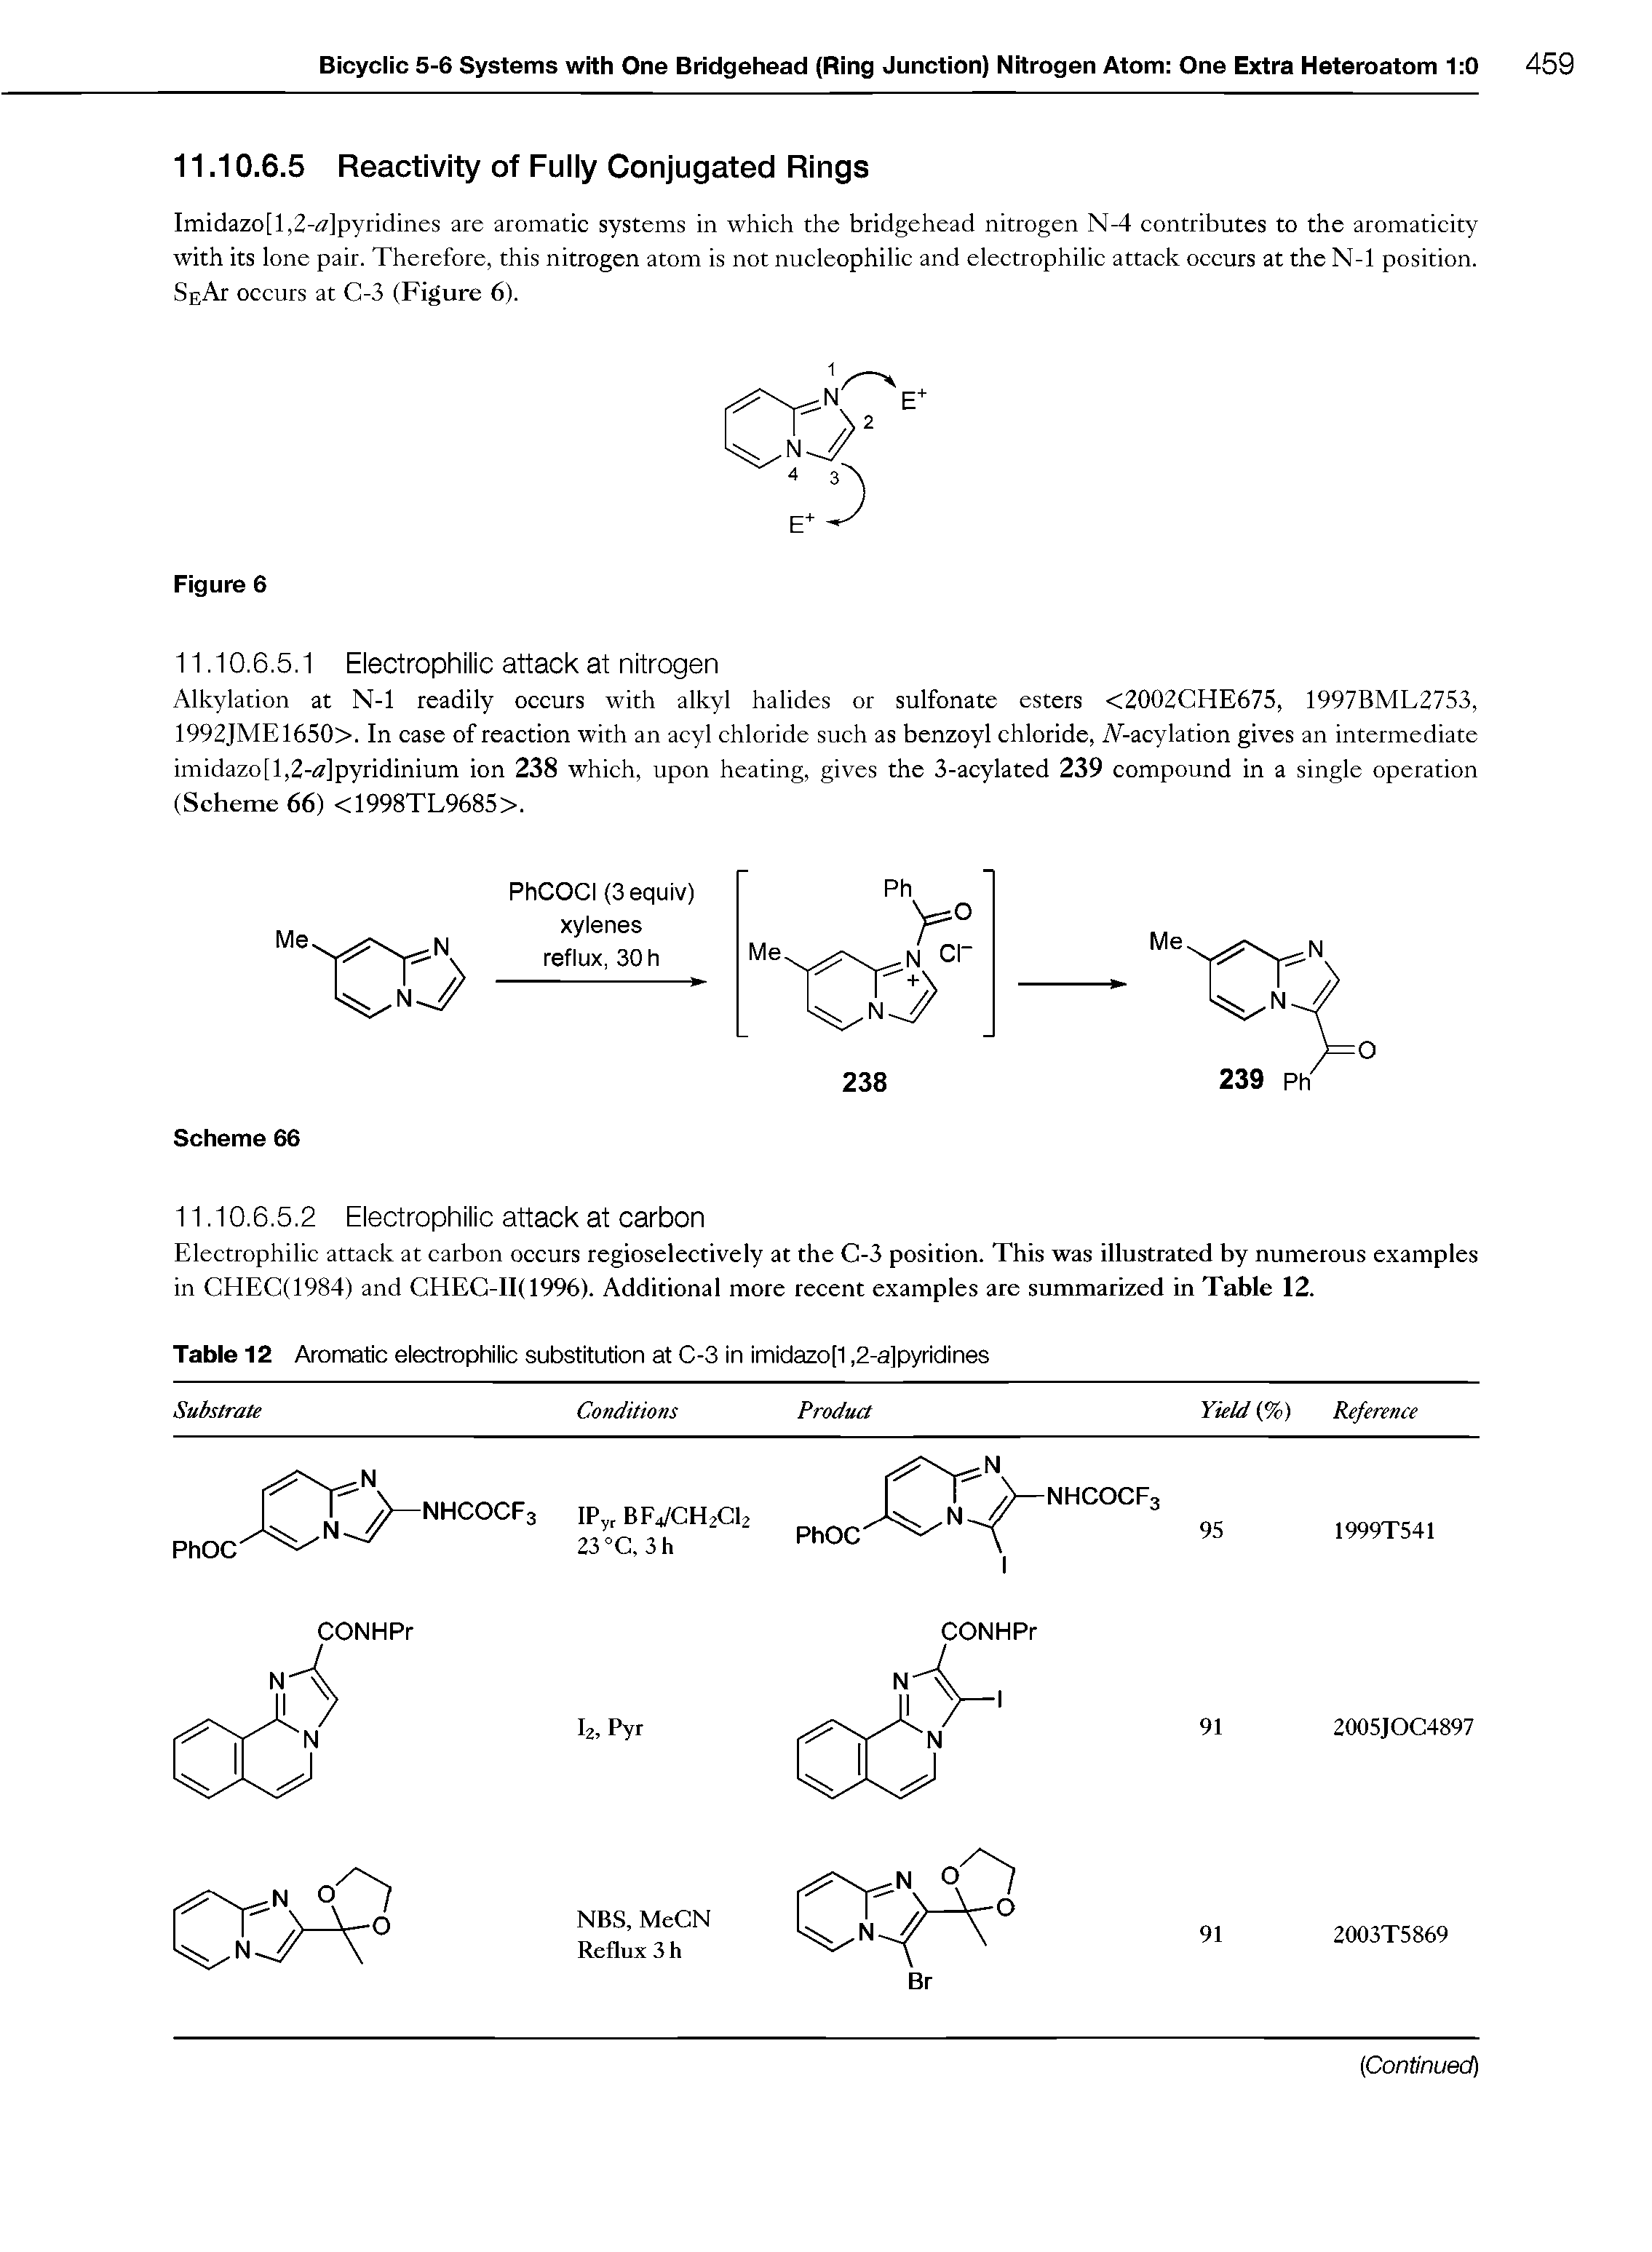 Table 12 Aromatic electrophilic substitution at C-3 in imidazo[1,2-a]pyridines...